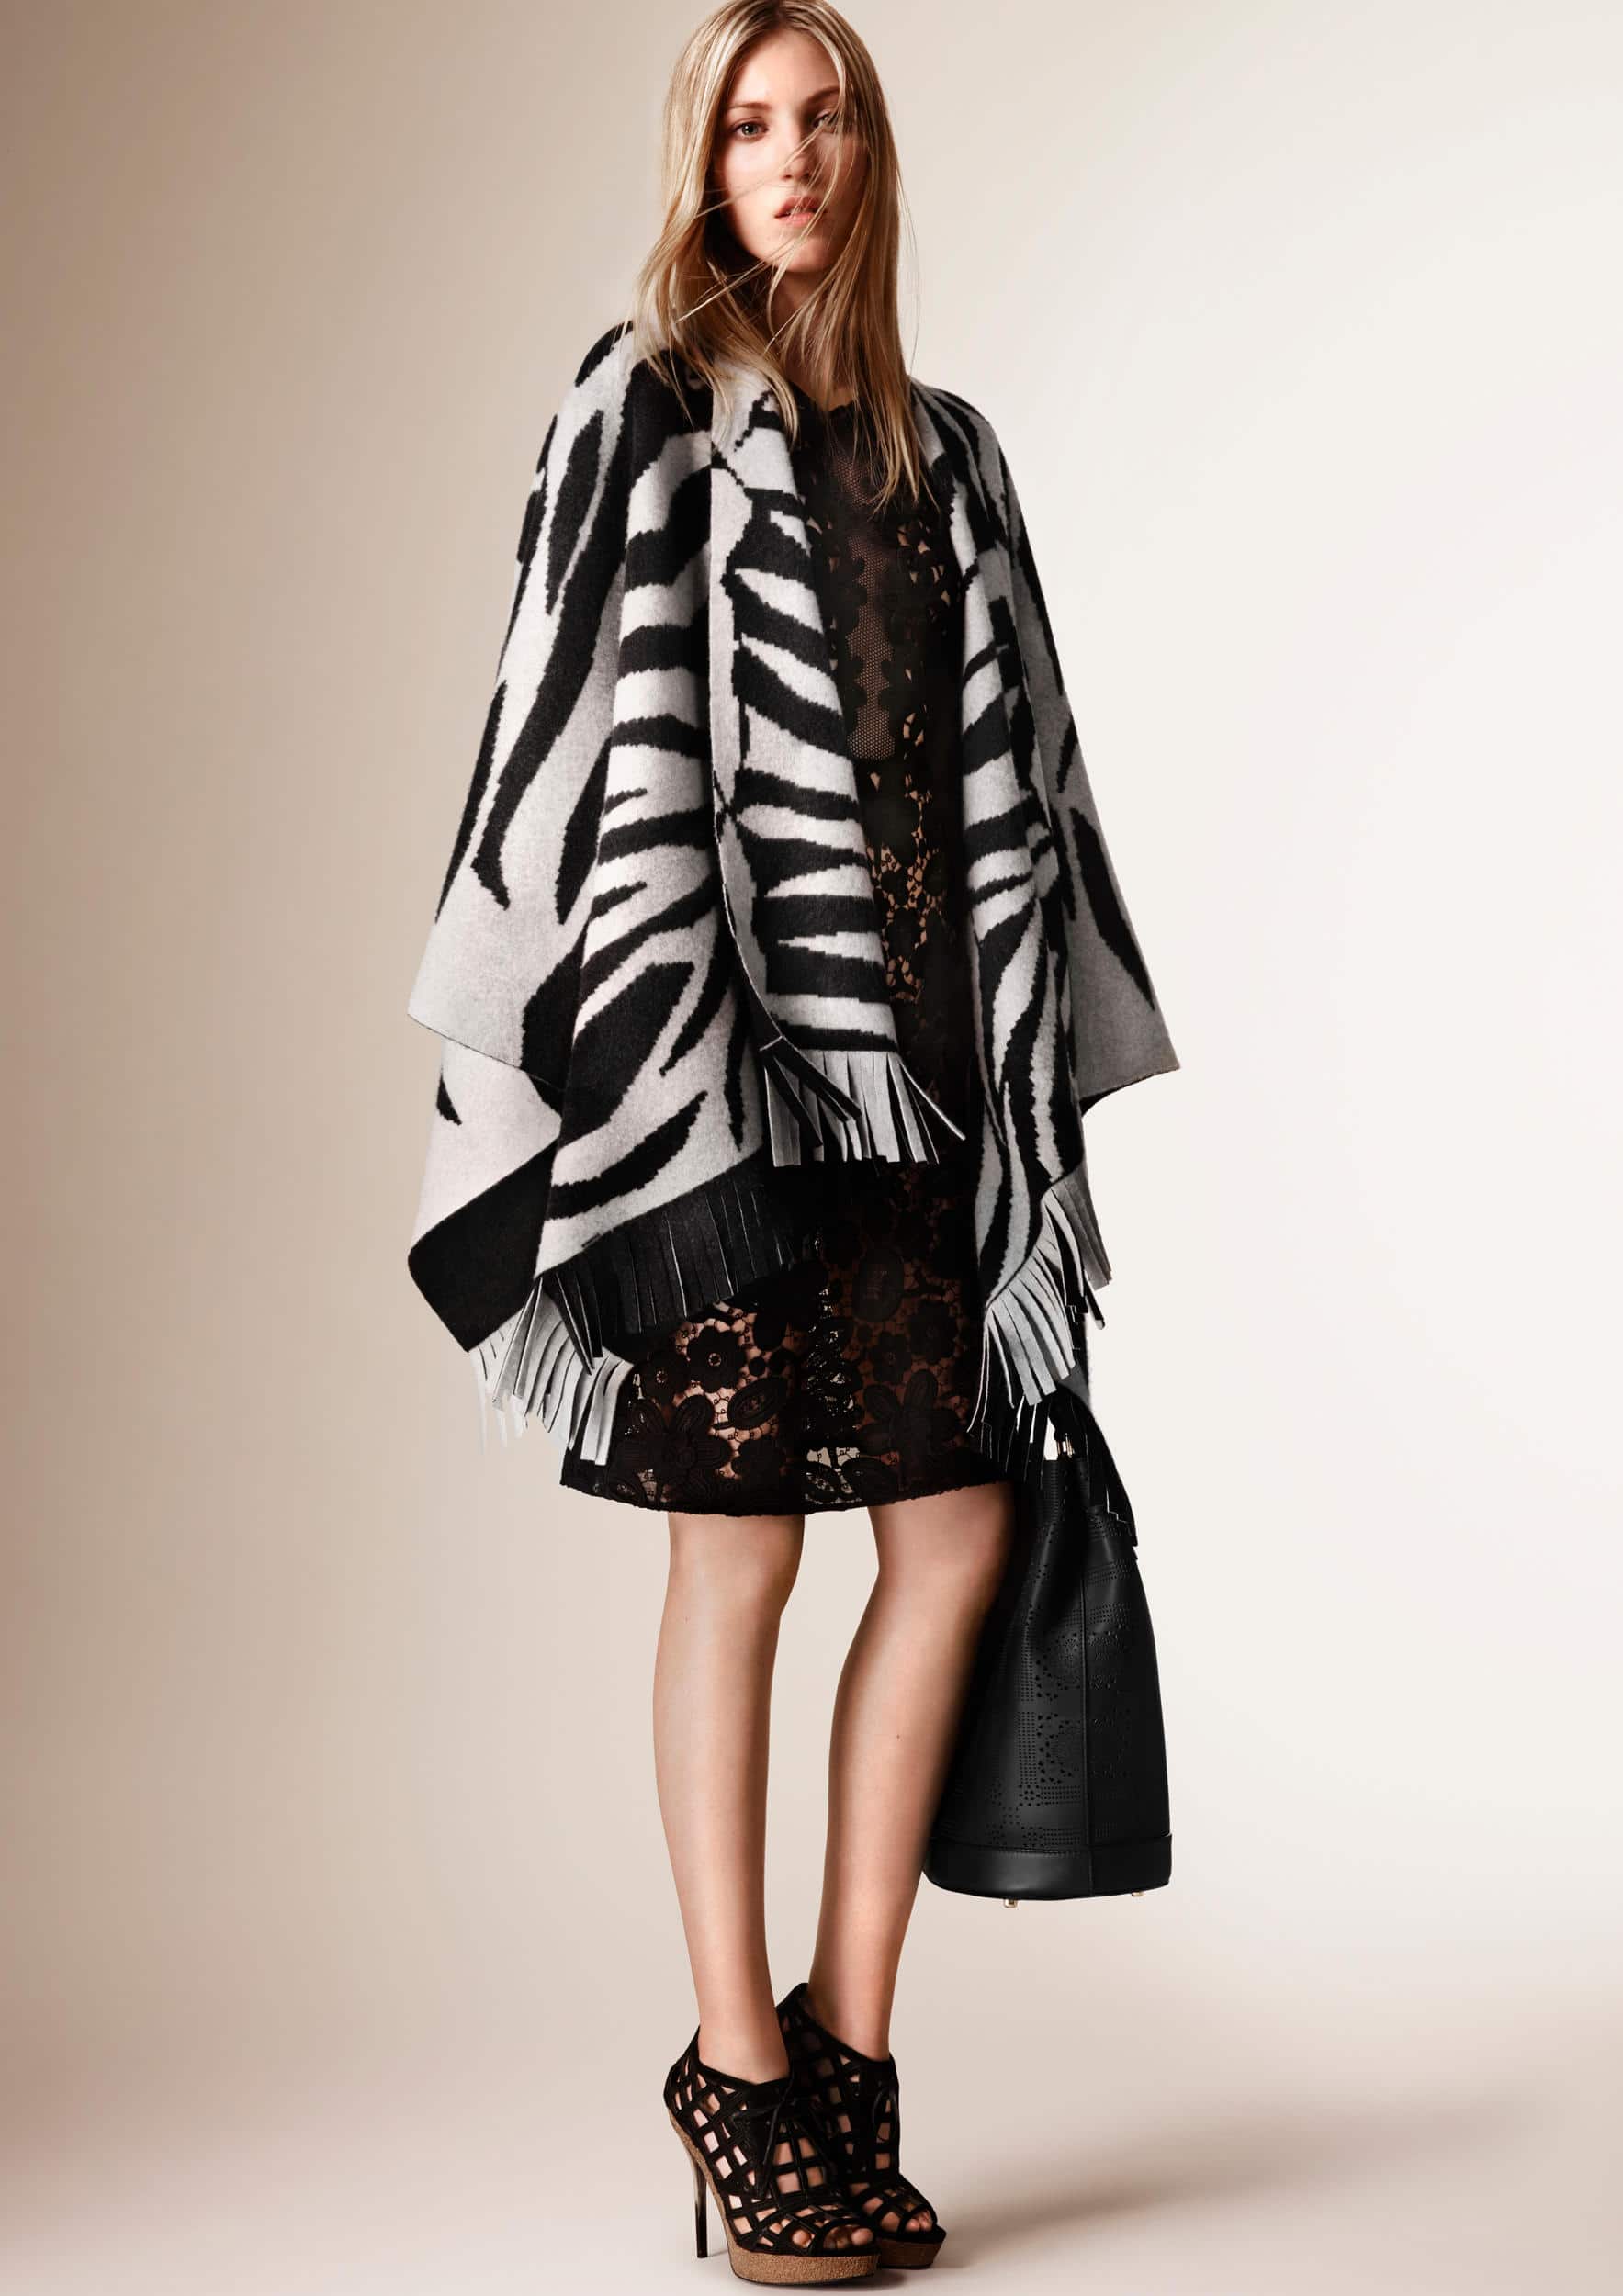 burberry-resort-collection-2016-5